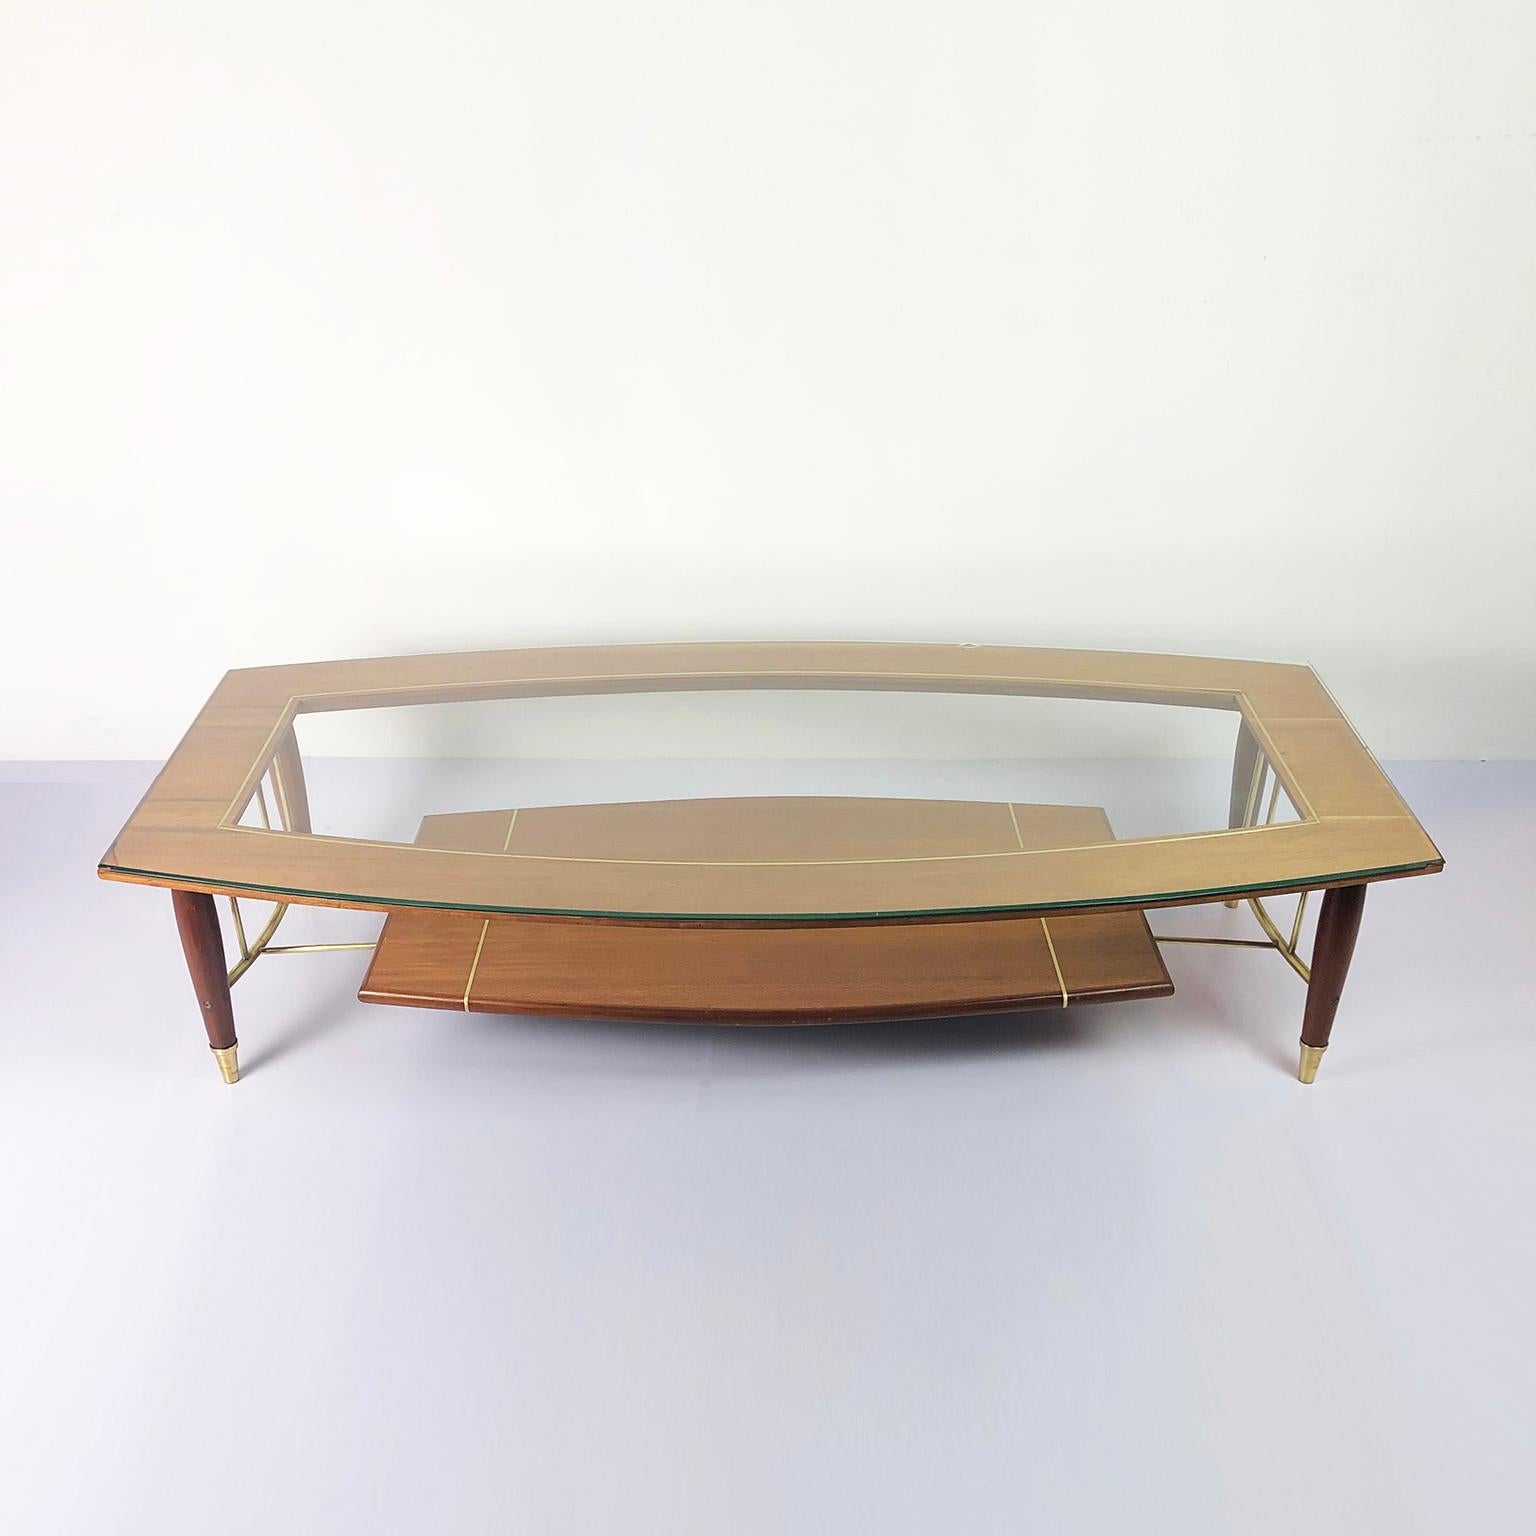 We offer these tables in mahogany wood and brass accents designed by Frank Kyle, circa 1970.